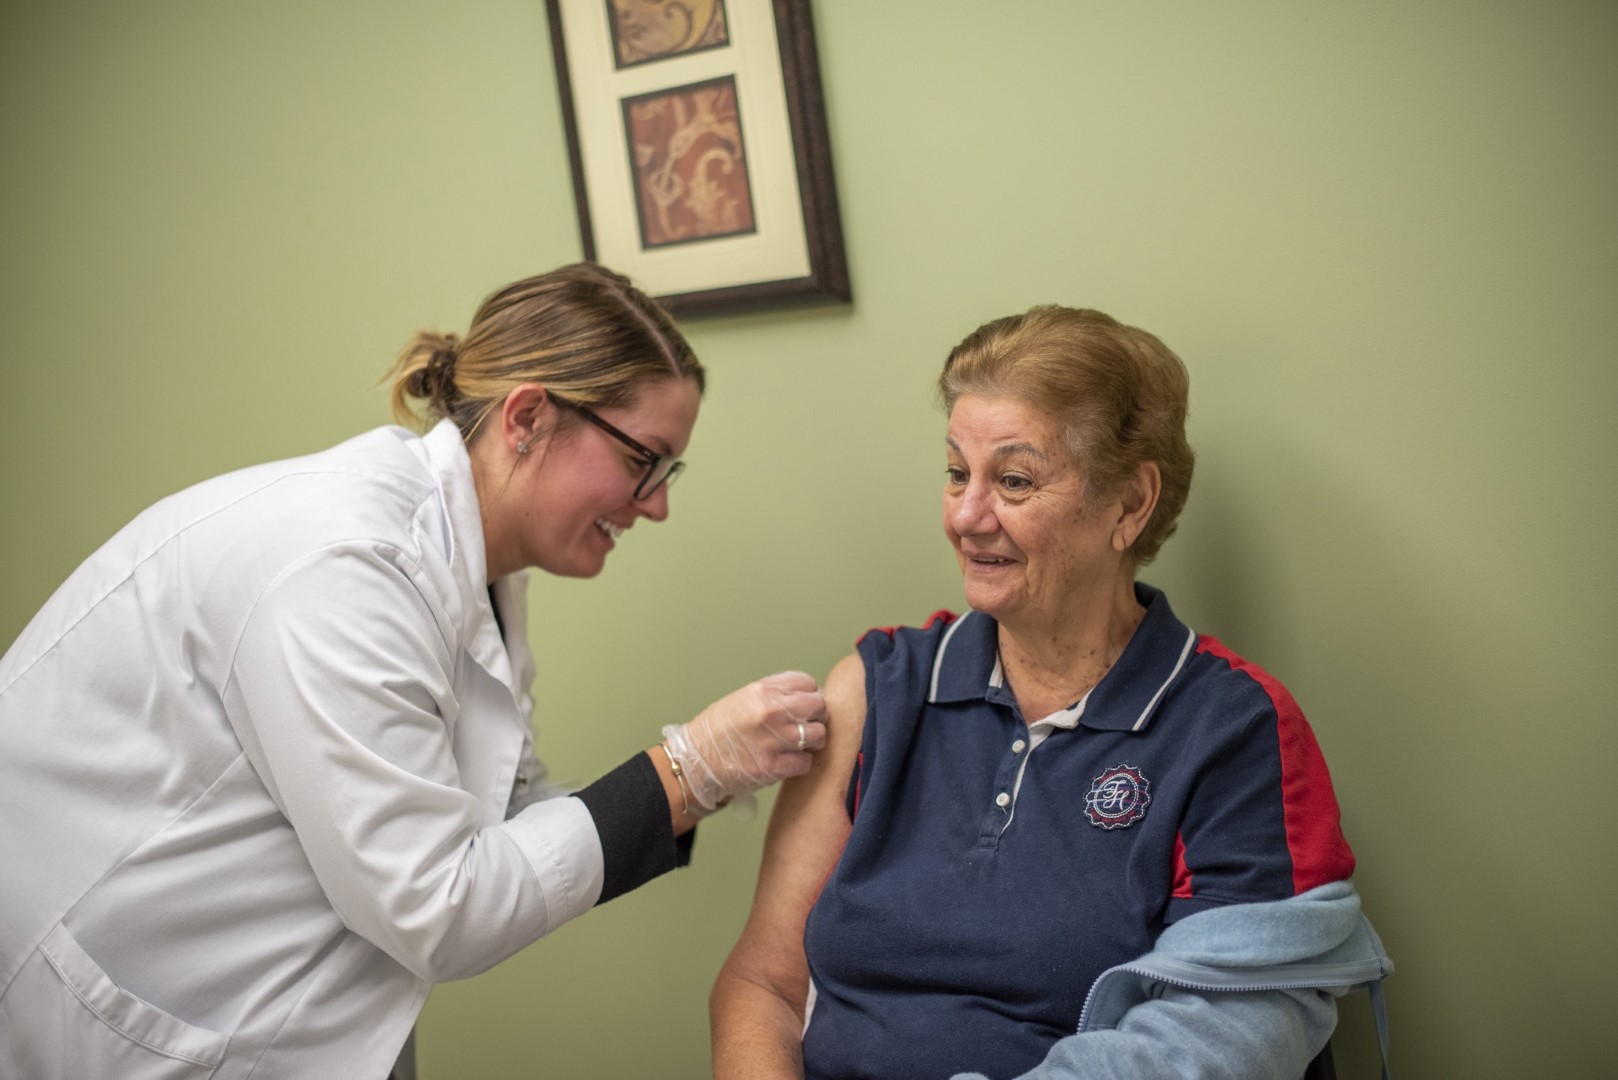 How can you afford a flu shot if you’re low-income and uninsured? Americares Free Clinics has provided more than 1,000 flu shots this season. Photo by Americares